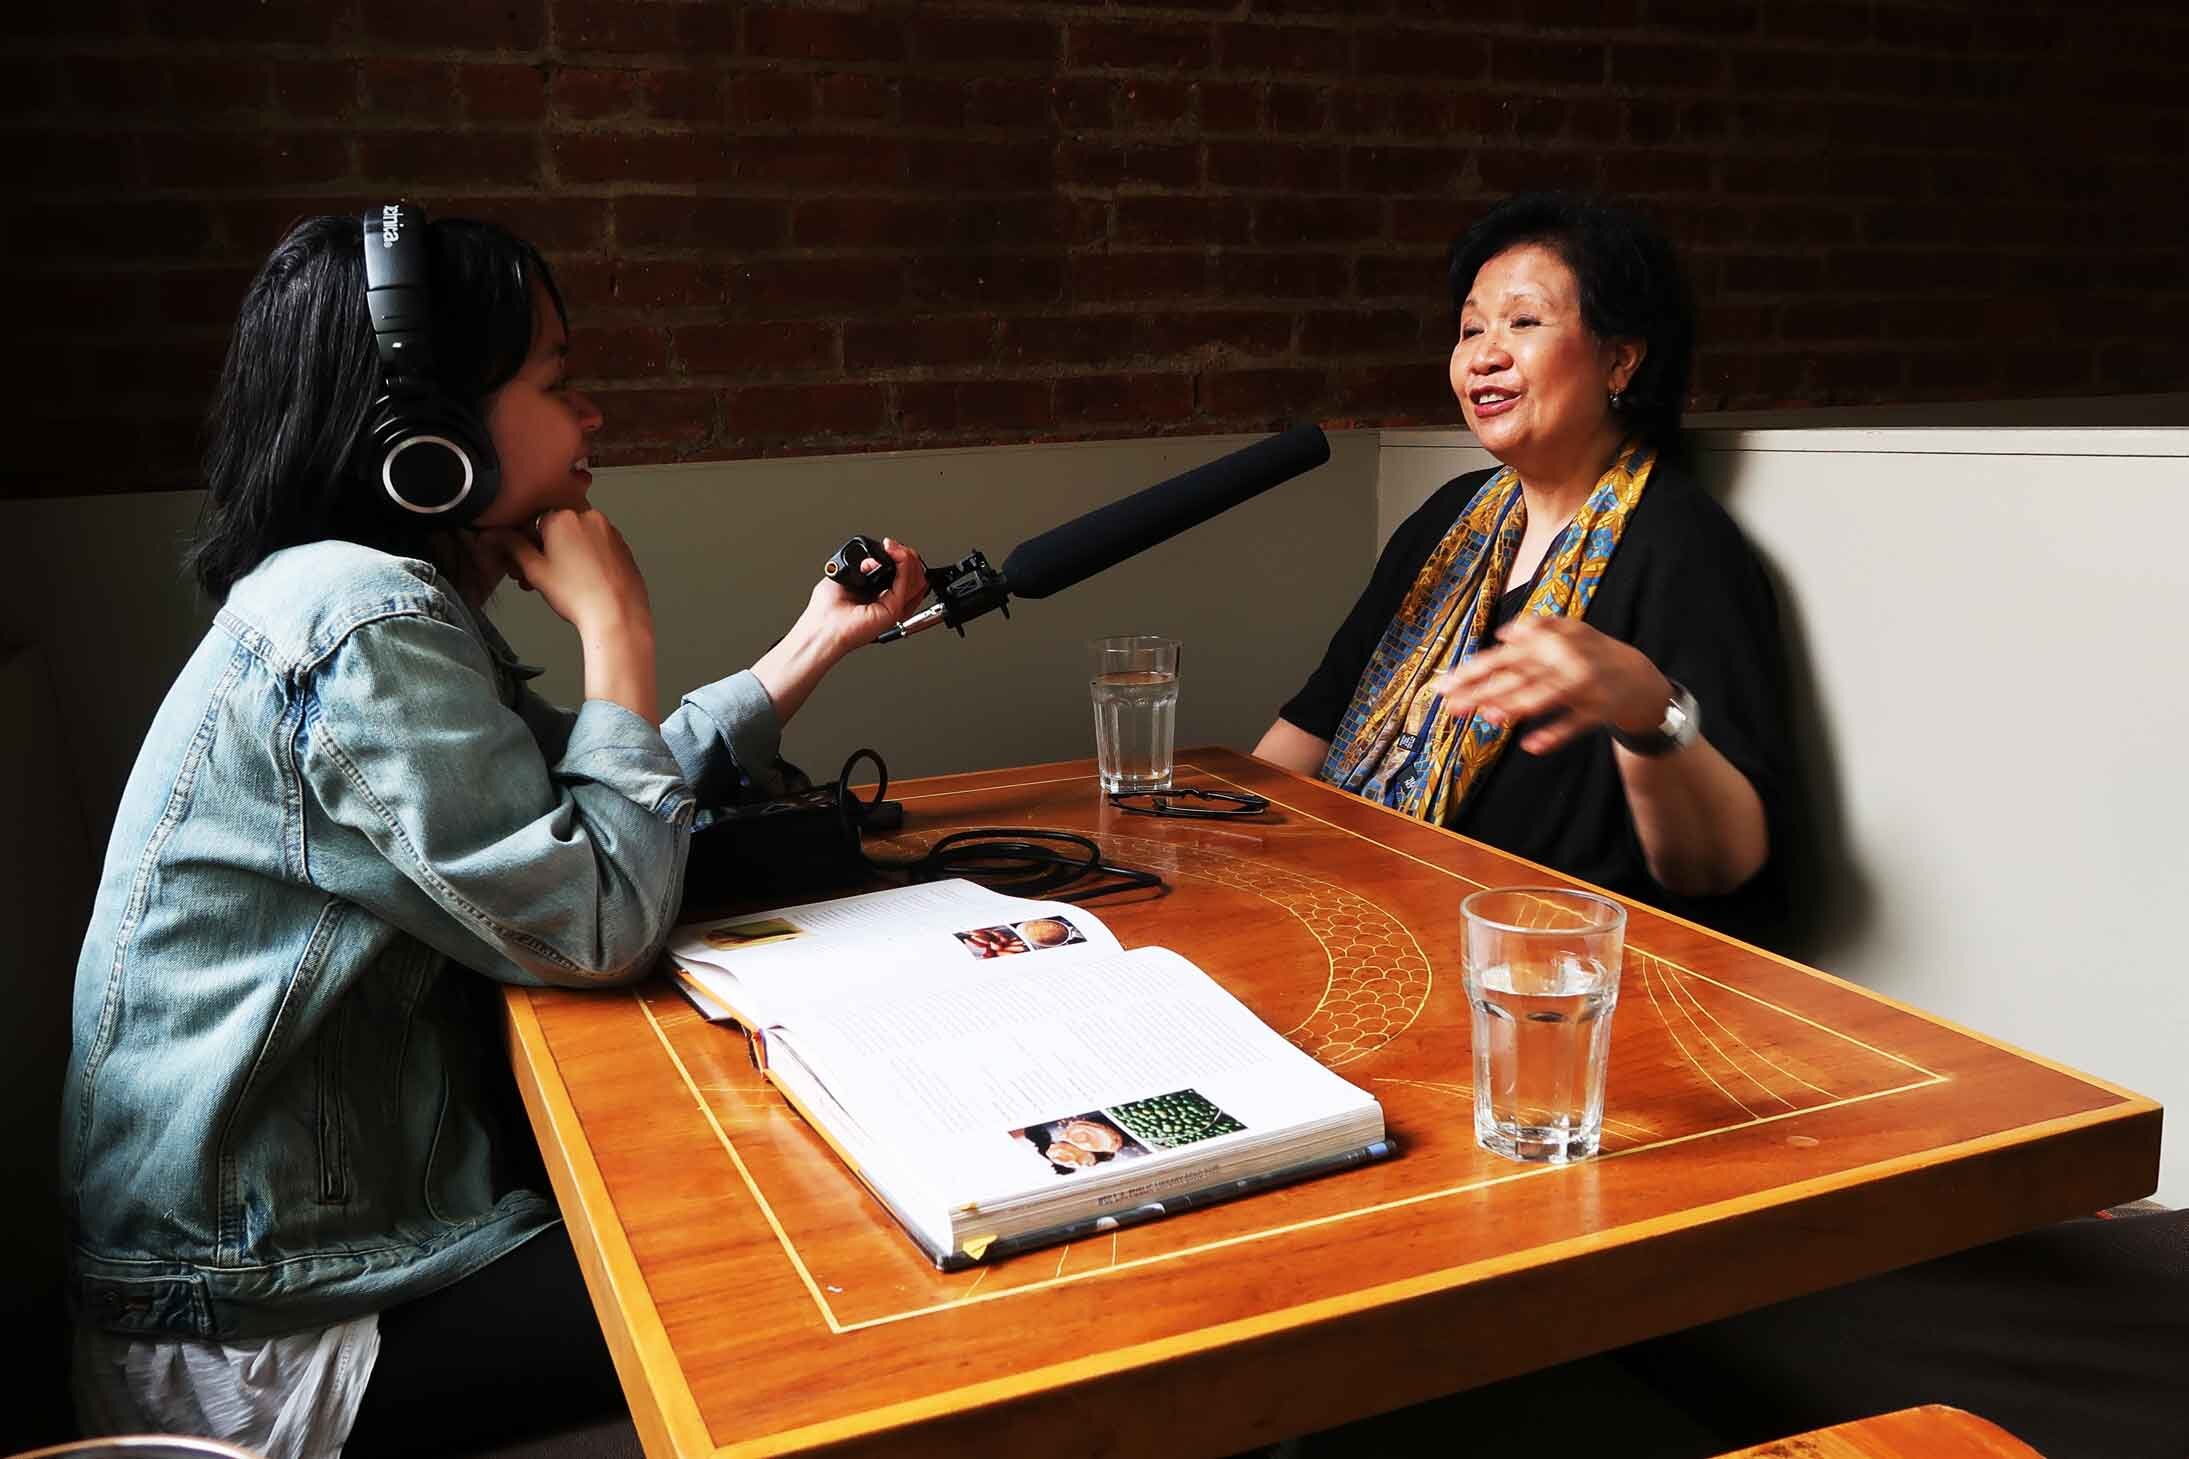  Long Distance host/producer Paola Mardo speaks with Amy Besa, author of “Memories of Philippine Kitchens” and owner of Purple Yam Brooklyn and Purple Yam Malate. Photo by Patrick Epino. 